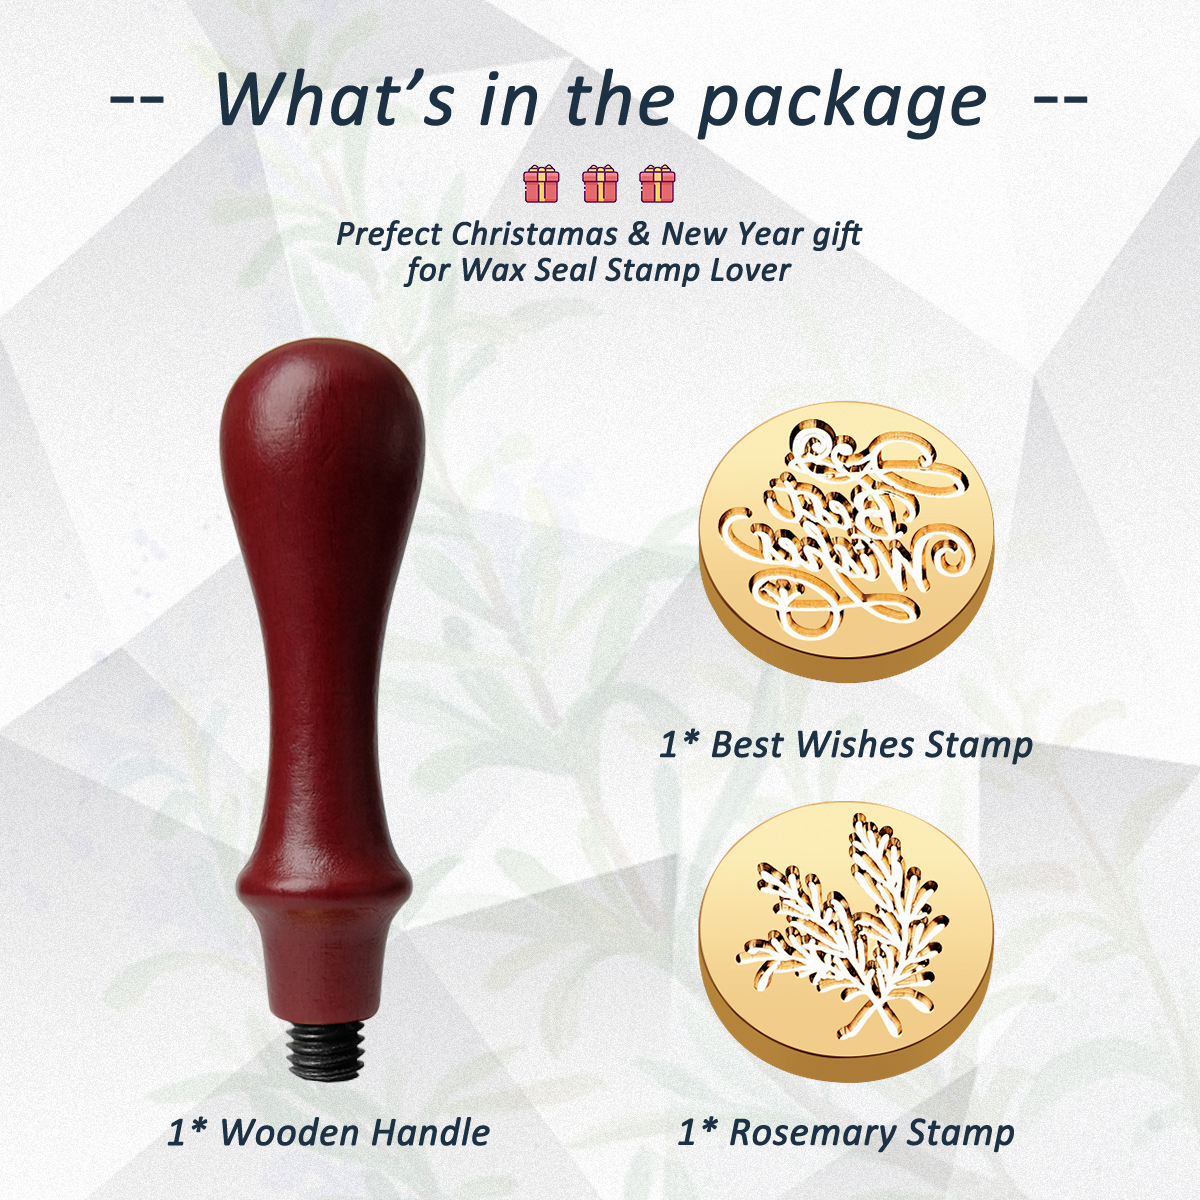 UCINNOVATE Wax Seal Stamp Retro Wood Handle + Brass Head Sealing Stamp for Christmas Gift, Cards Envelopes, Invitations, Wine Packages(Blessing Series)